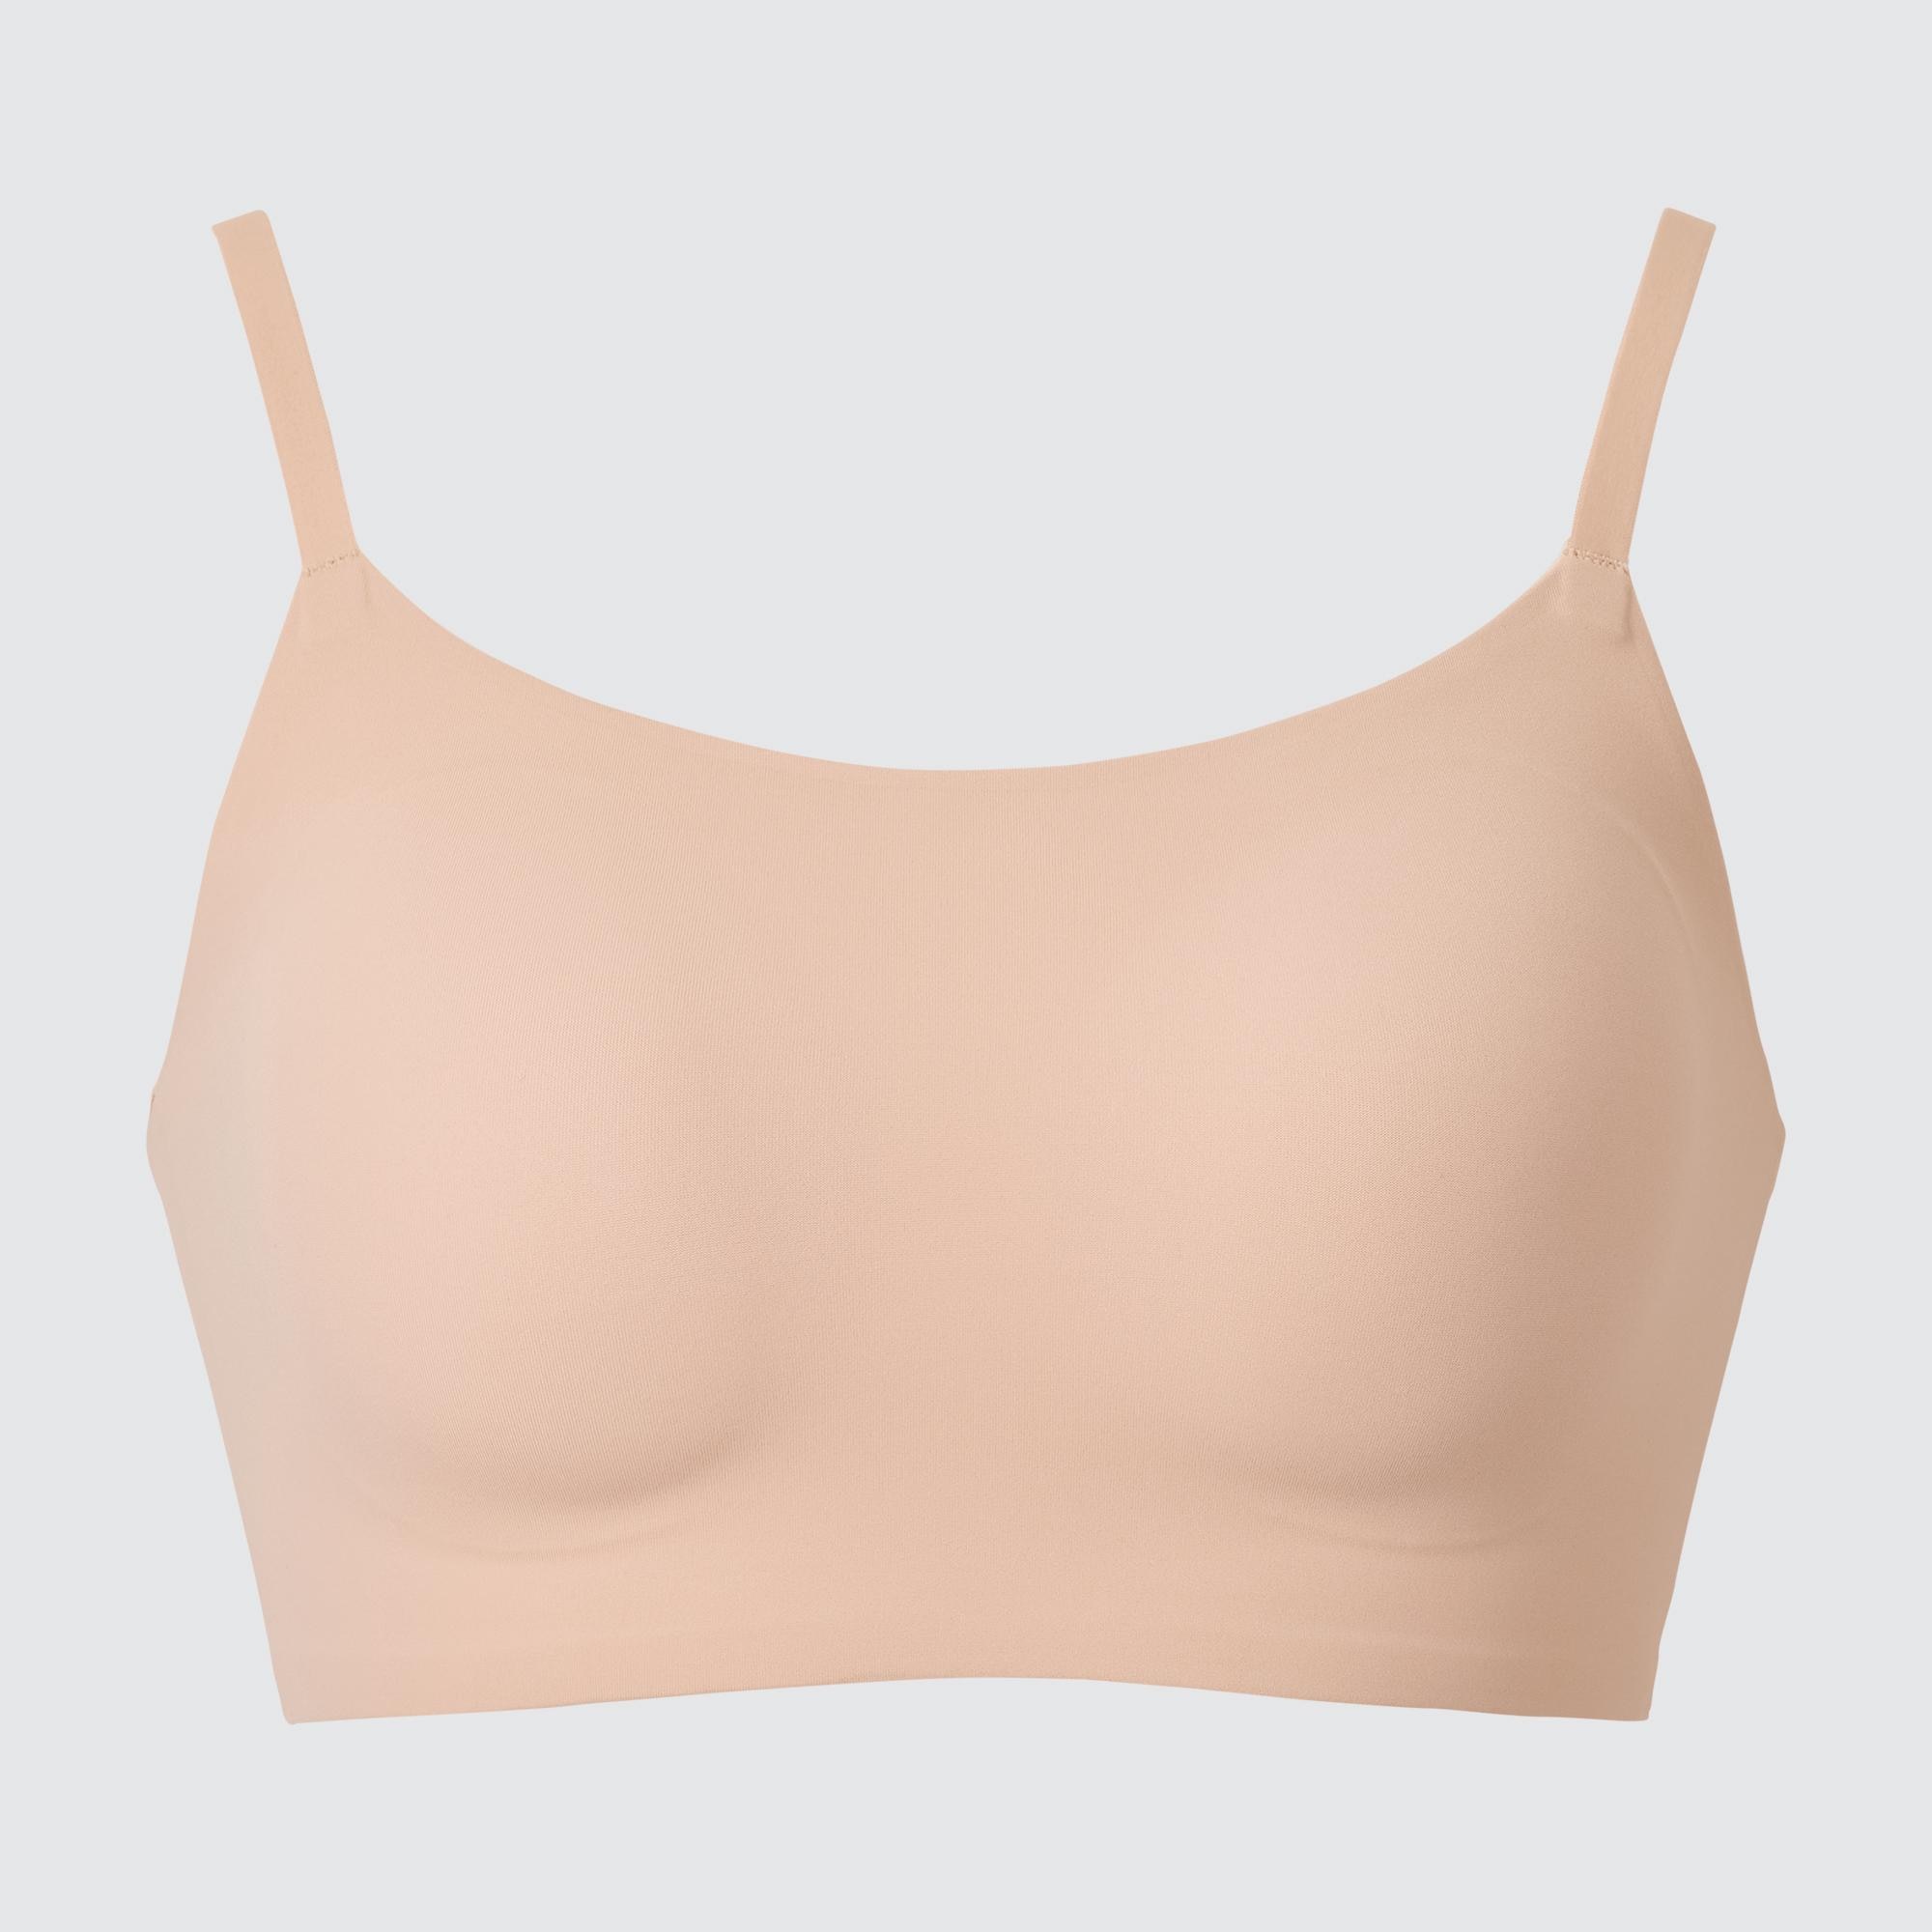 Flaunt comfort, hide the details! Discover Uniqlo's Wireless Bras